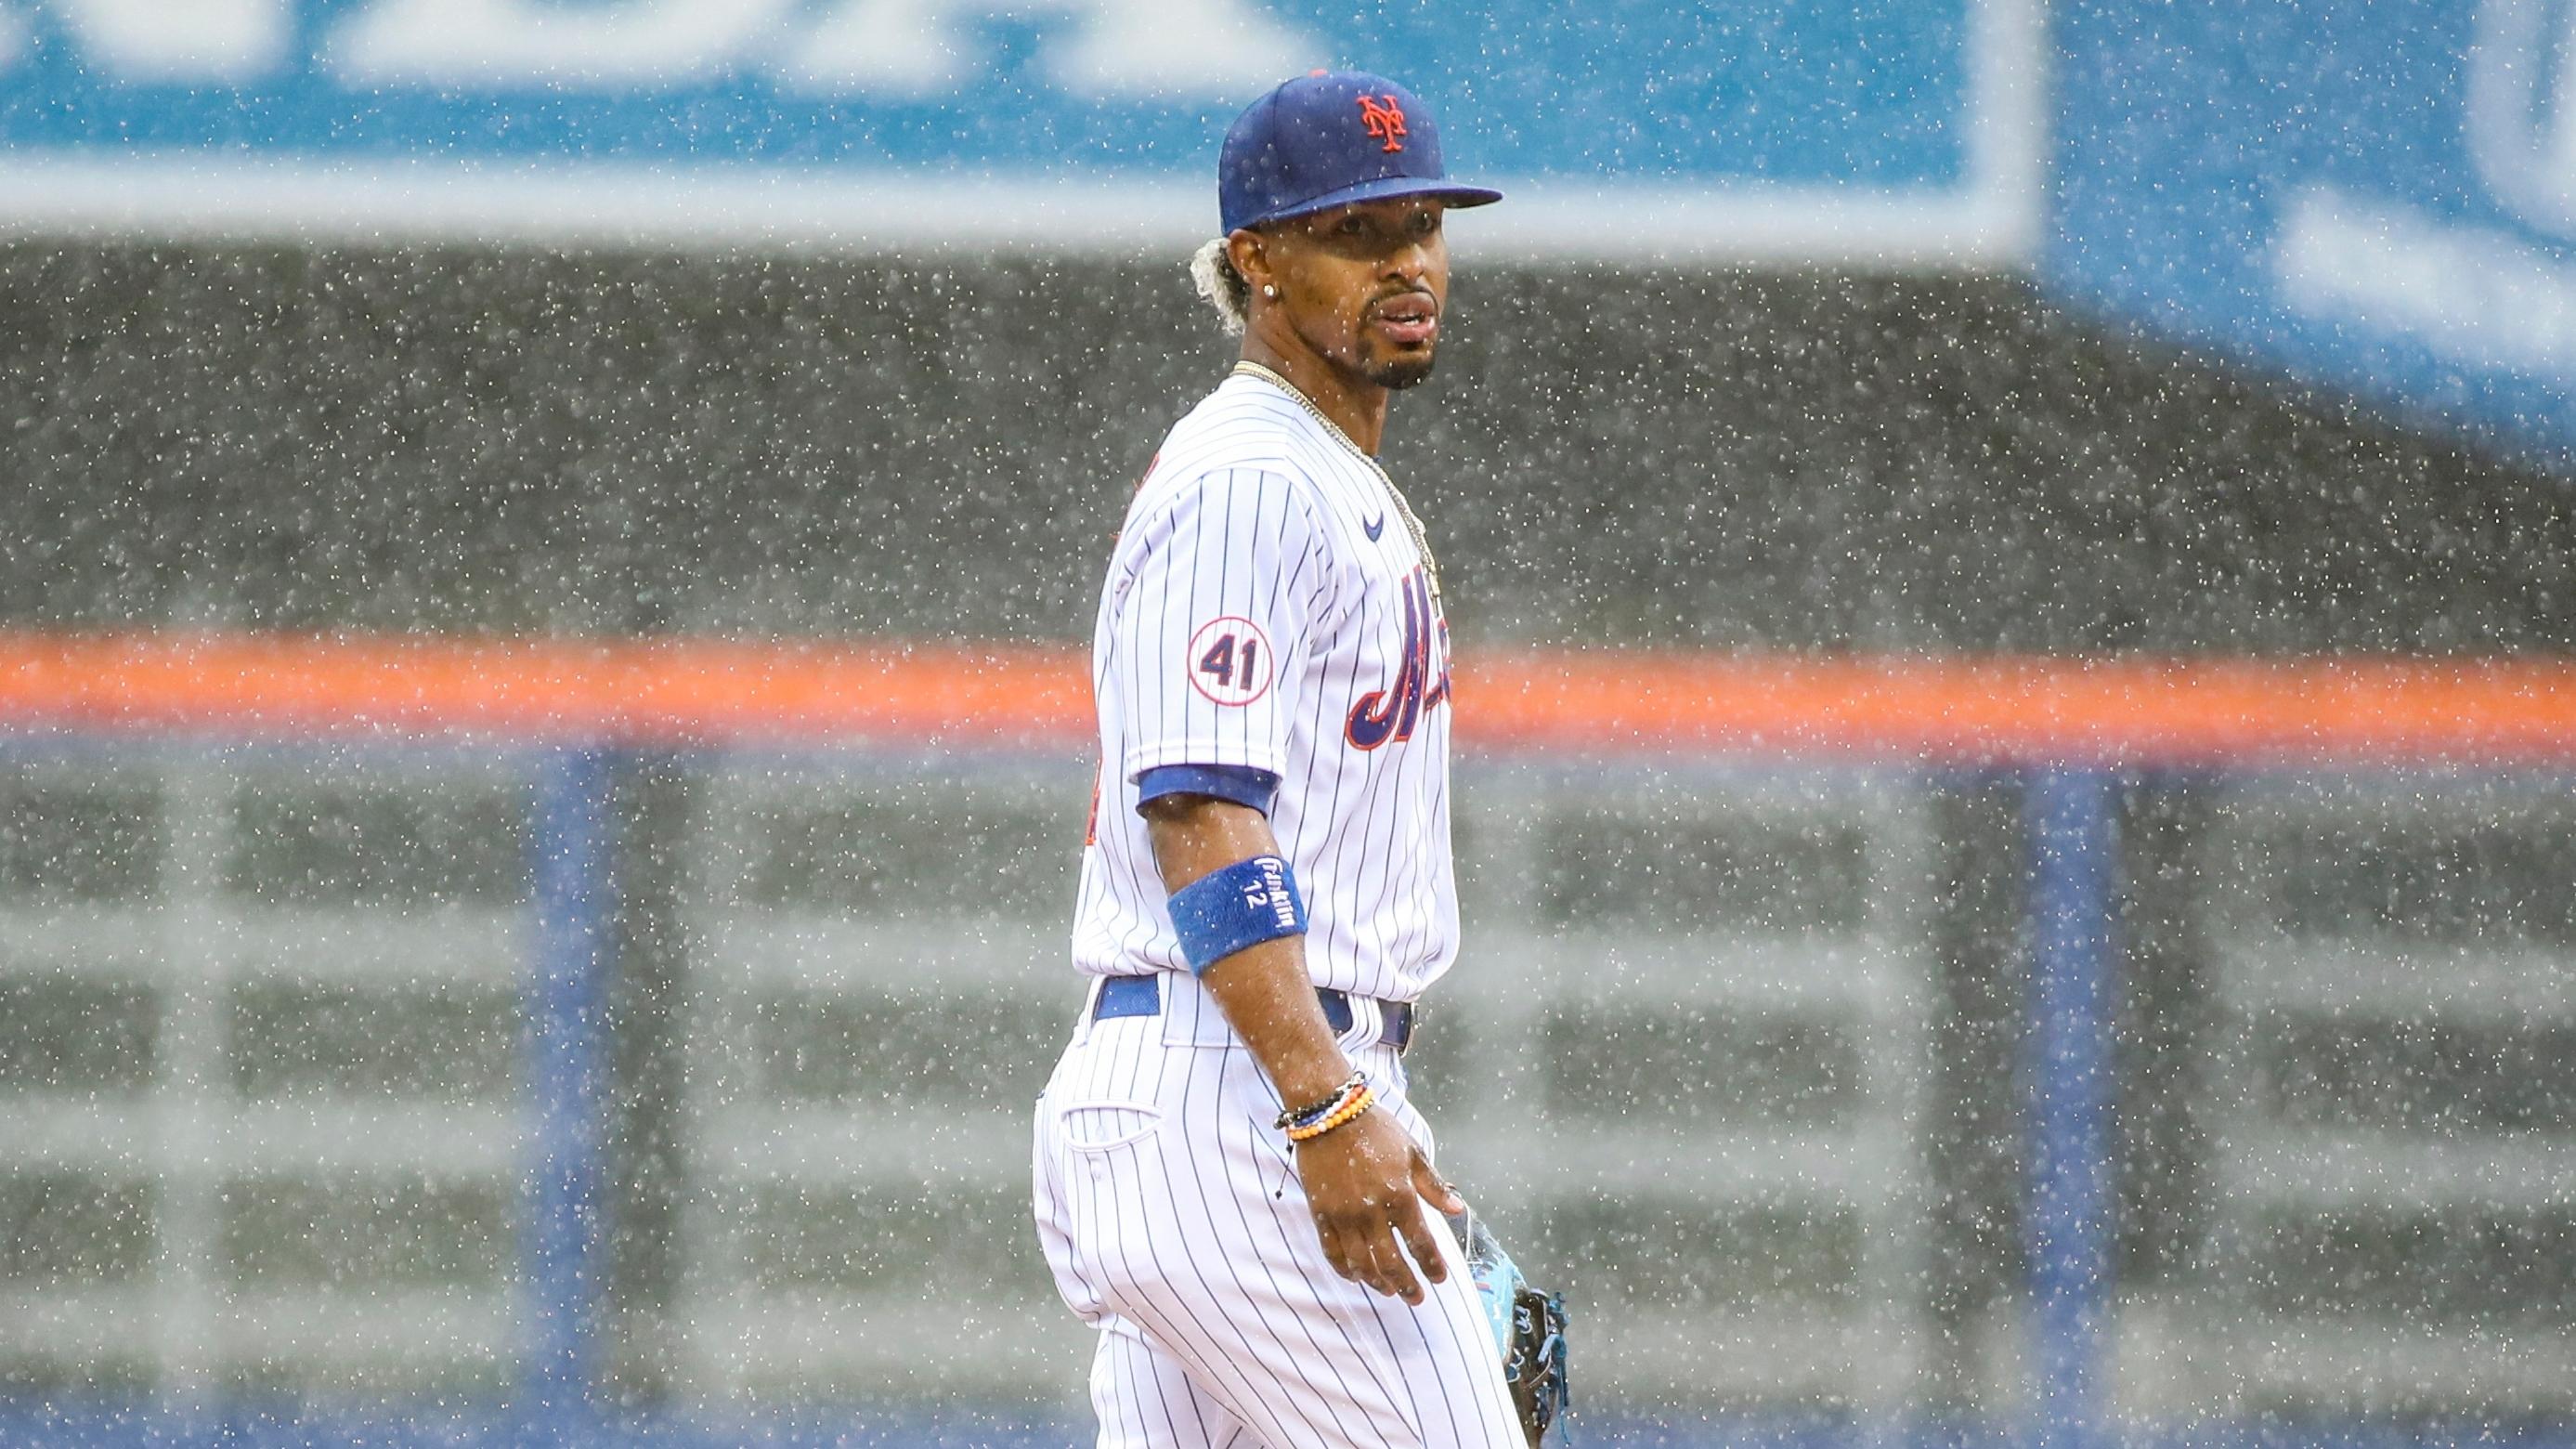 New York Mets shortstop Francisco Lindor (12) takes the field in the top of the first inning against the Miami Marlins prior to a rain delay at Citi Field. / Wendell Cruz-USA TODAY Sports